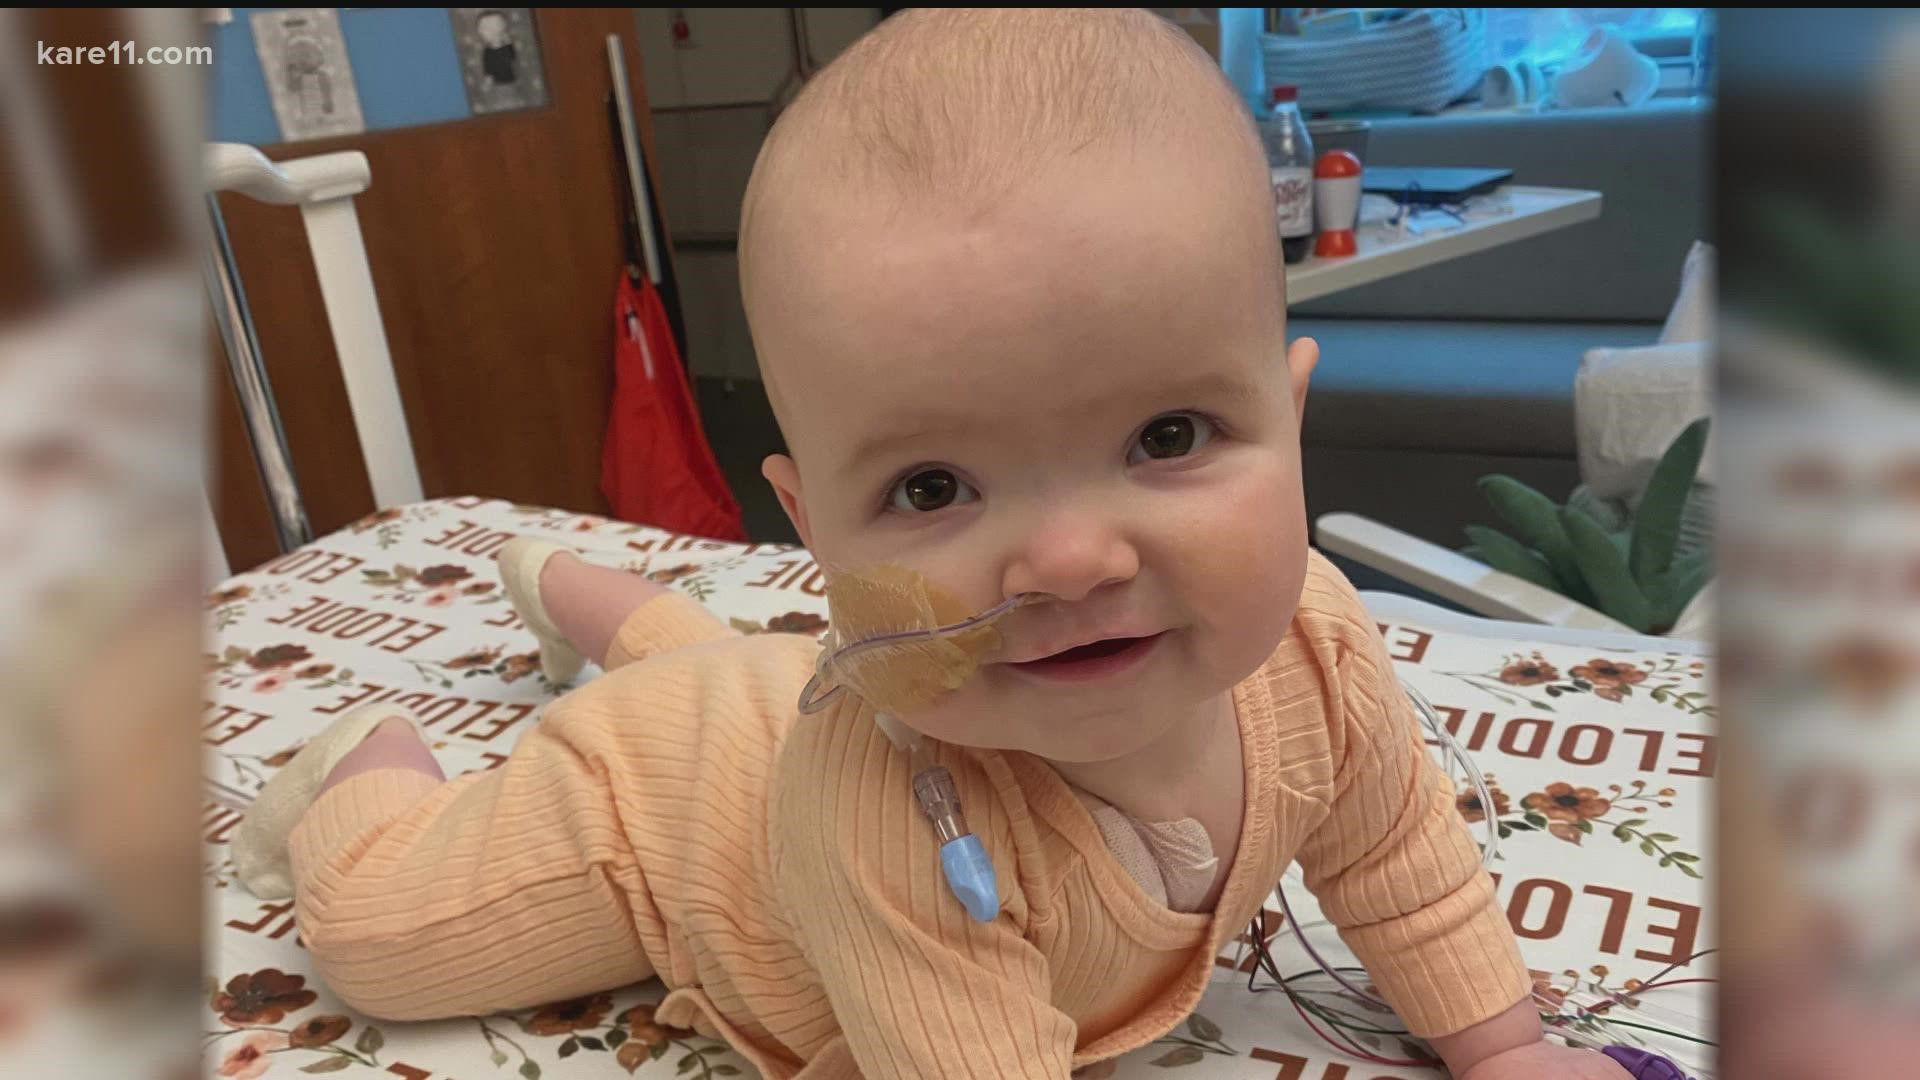 Eight-month-old Elodie is in need of a transplant after being diagnosed with a rare heart disorder.